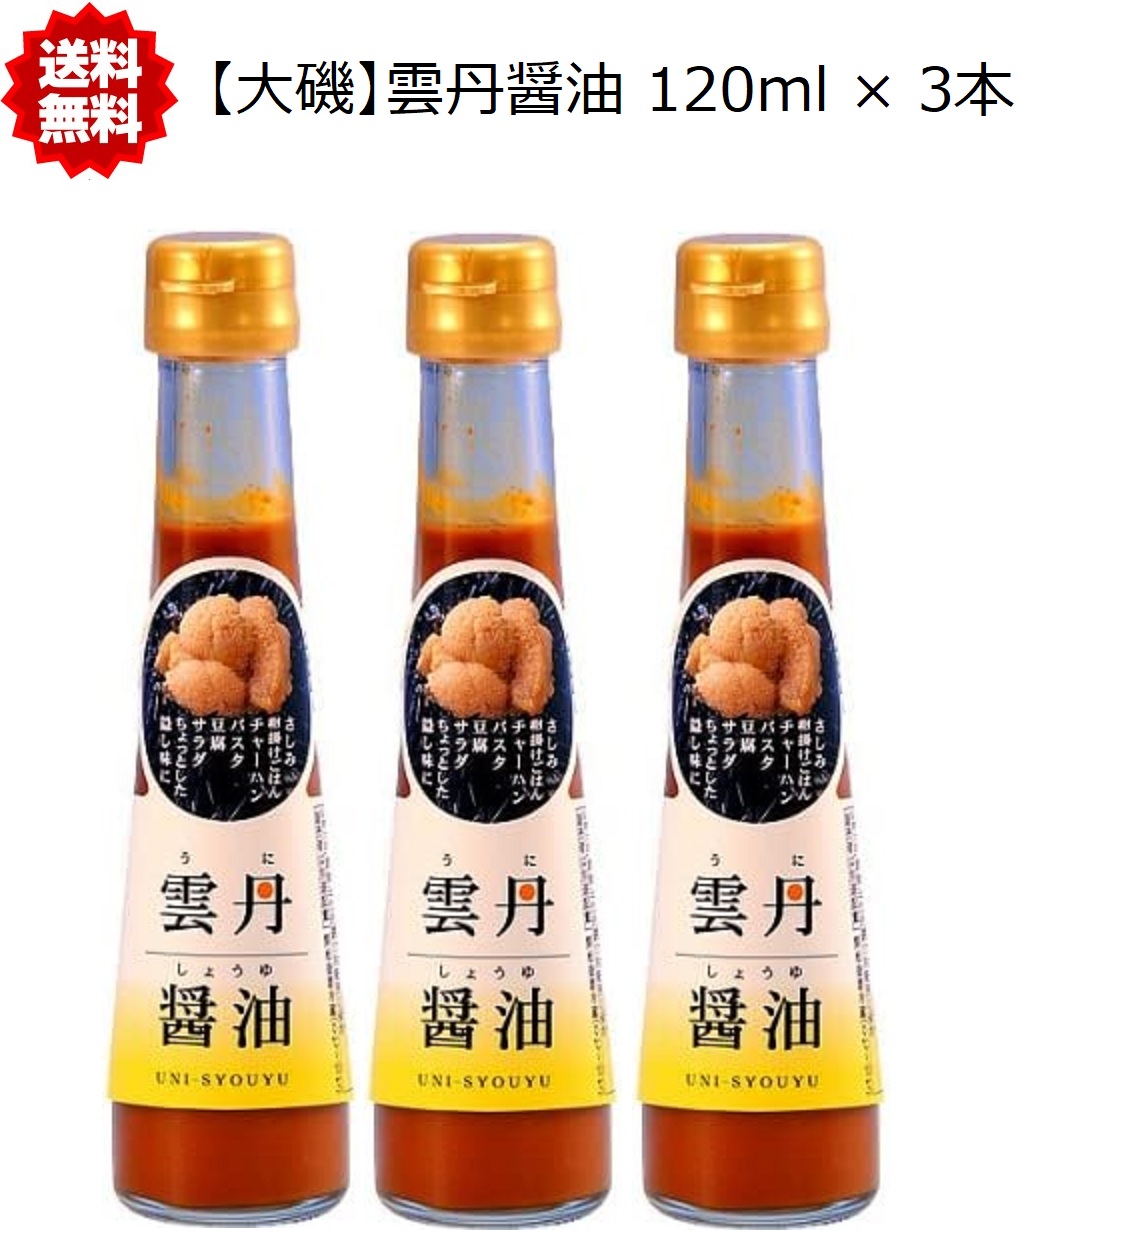 [3ps.@].. soy sauce 120ml